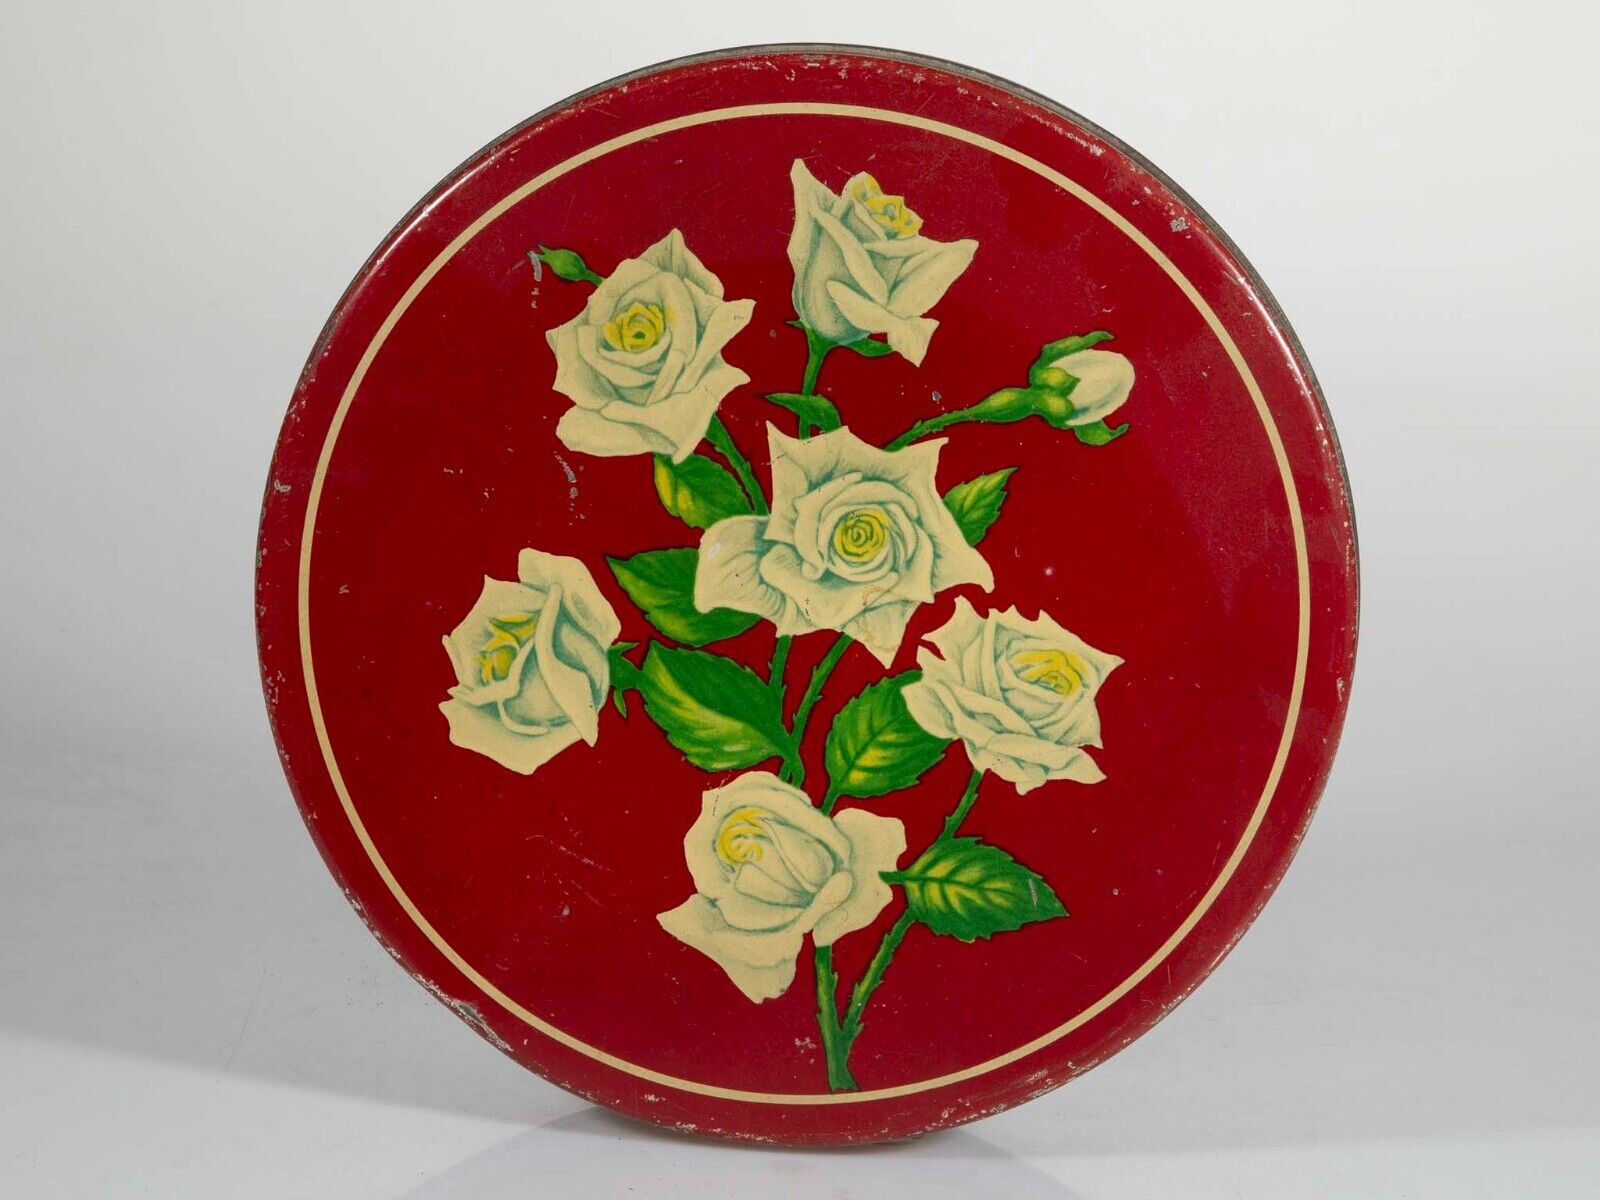 Vintage Round Tin - White Roses on Red Metal Box - Lovely MidCentury Container